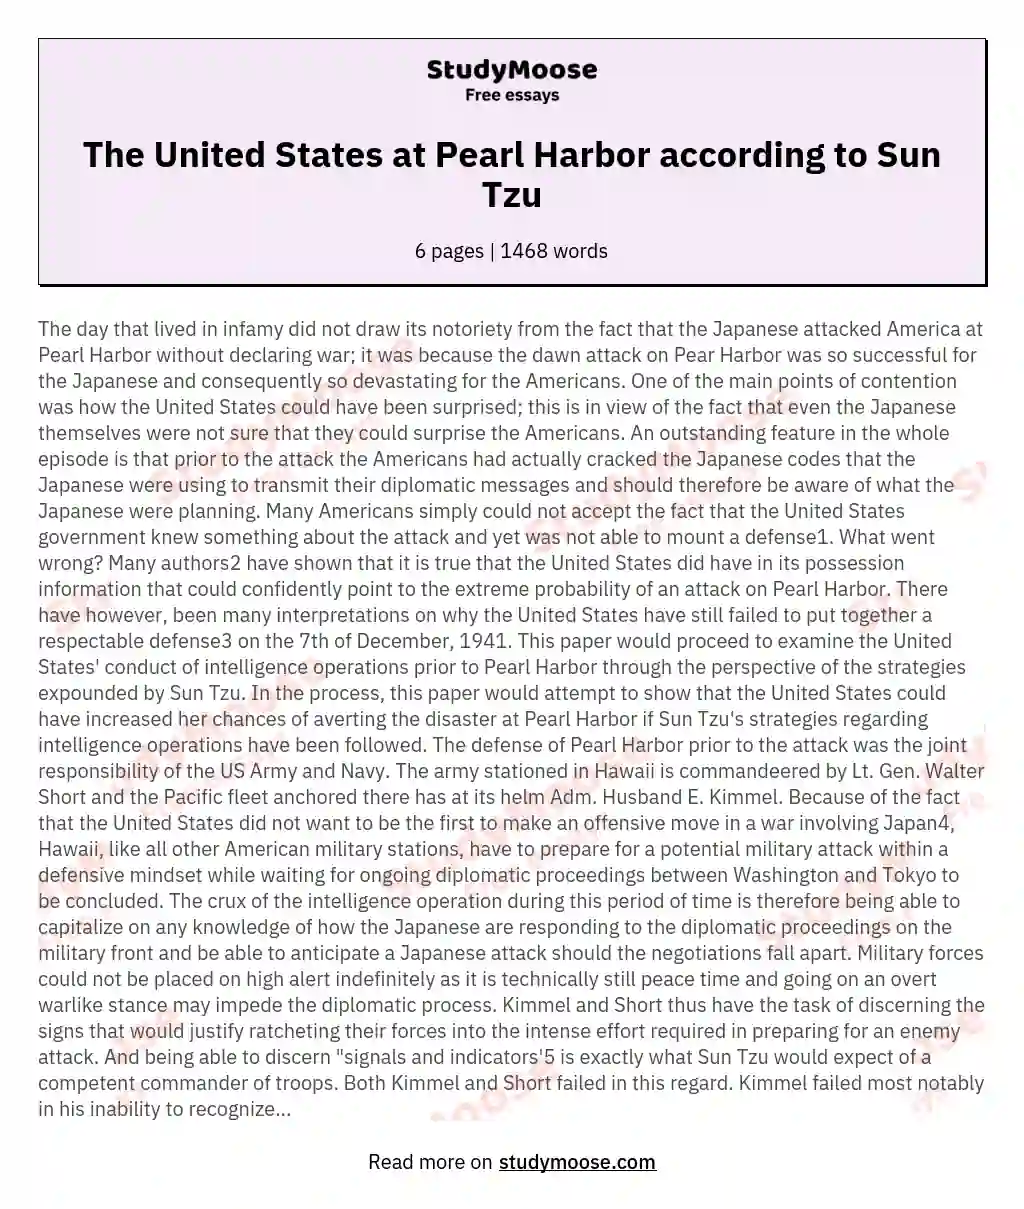 The United States at Pearl Harbor according to Sun Tzu